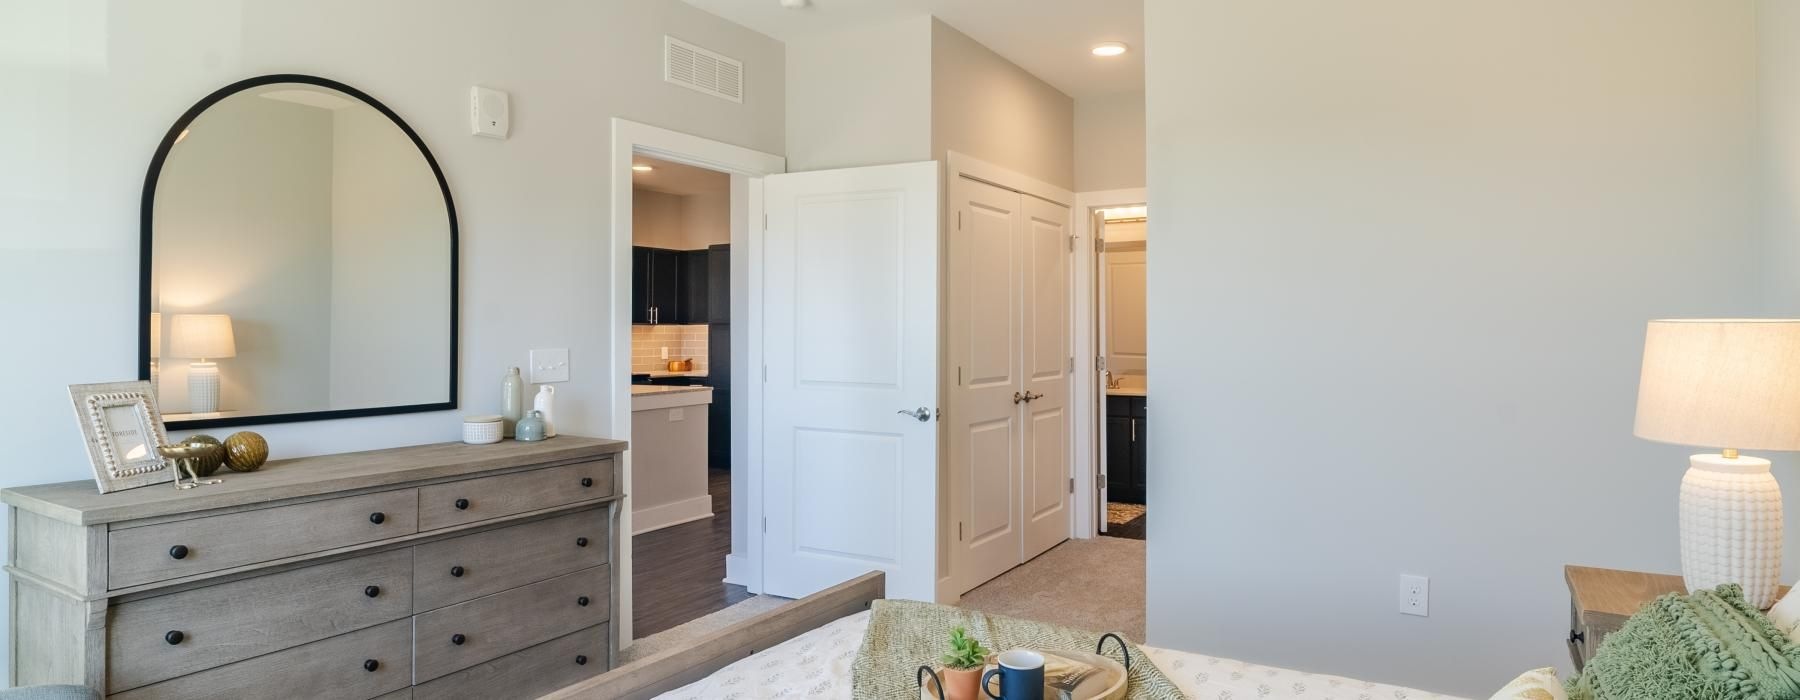 Model bedroom at our senior living community in Buford, GA, featuring white bedspread and a view of the closet.